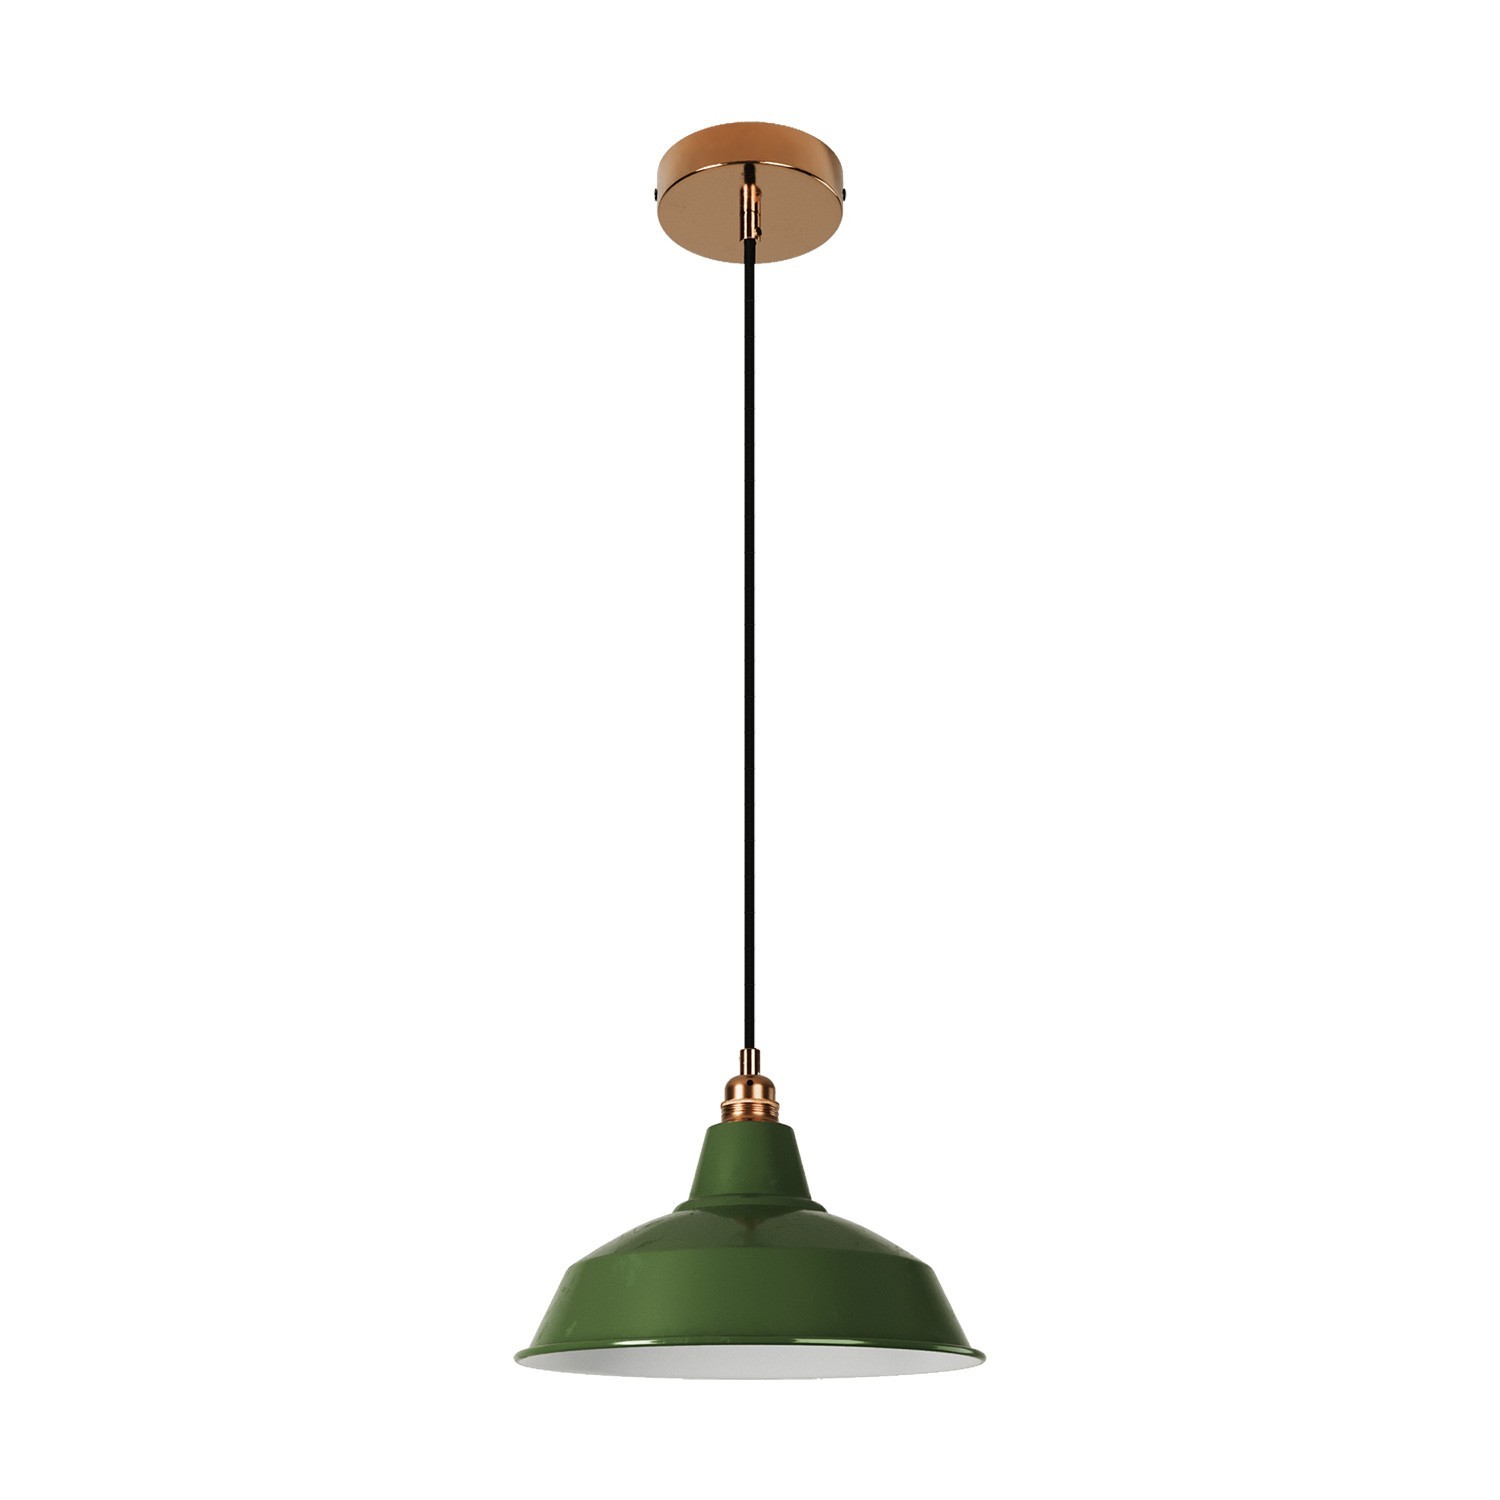 Pendant lamp with textile cable, Bistrot lampshade and metal details - Made in Italy - Bulb included